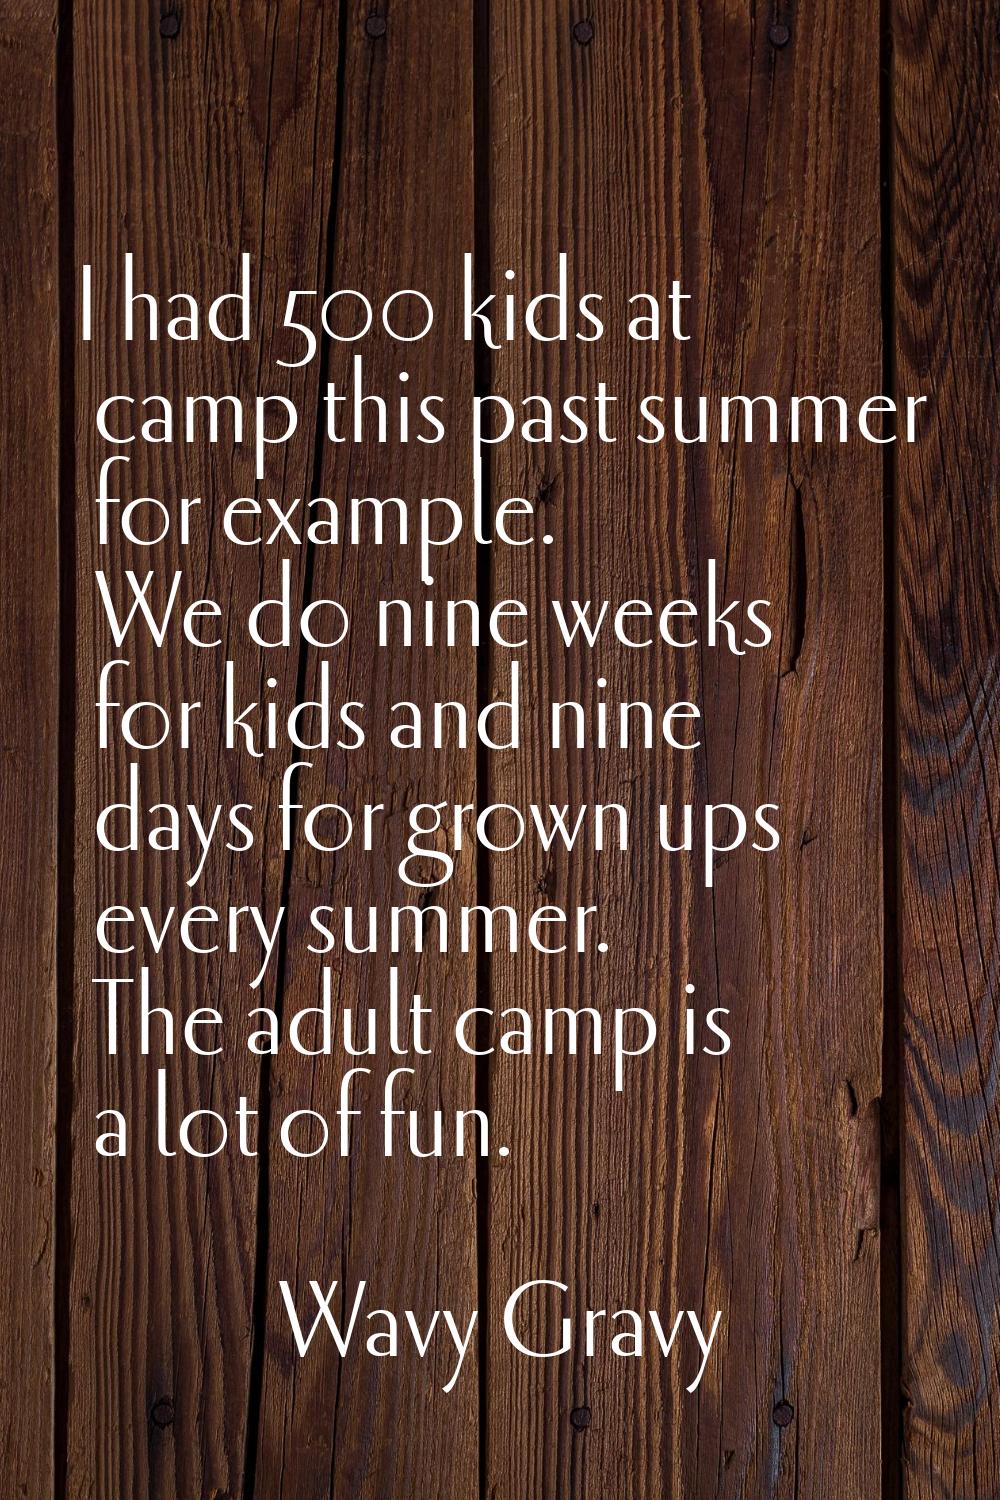 I had 500 kids at camp this past summer for example. We do nine weeks for kids and nine days for gr